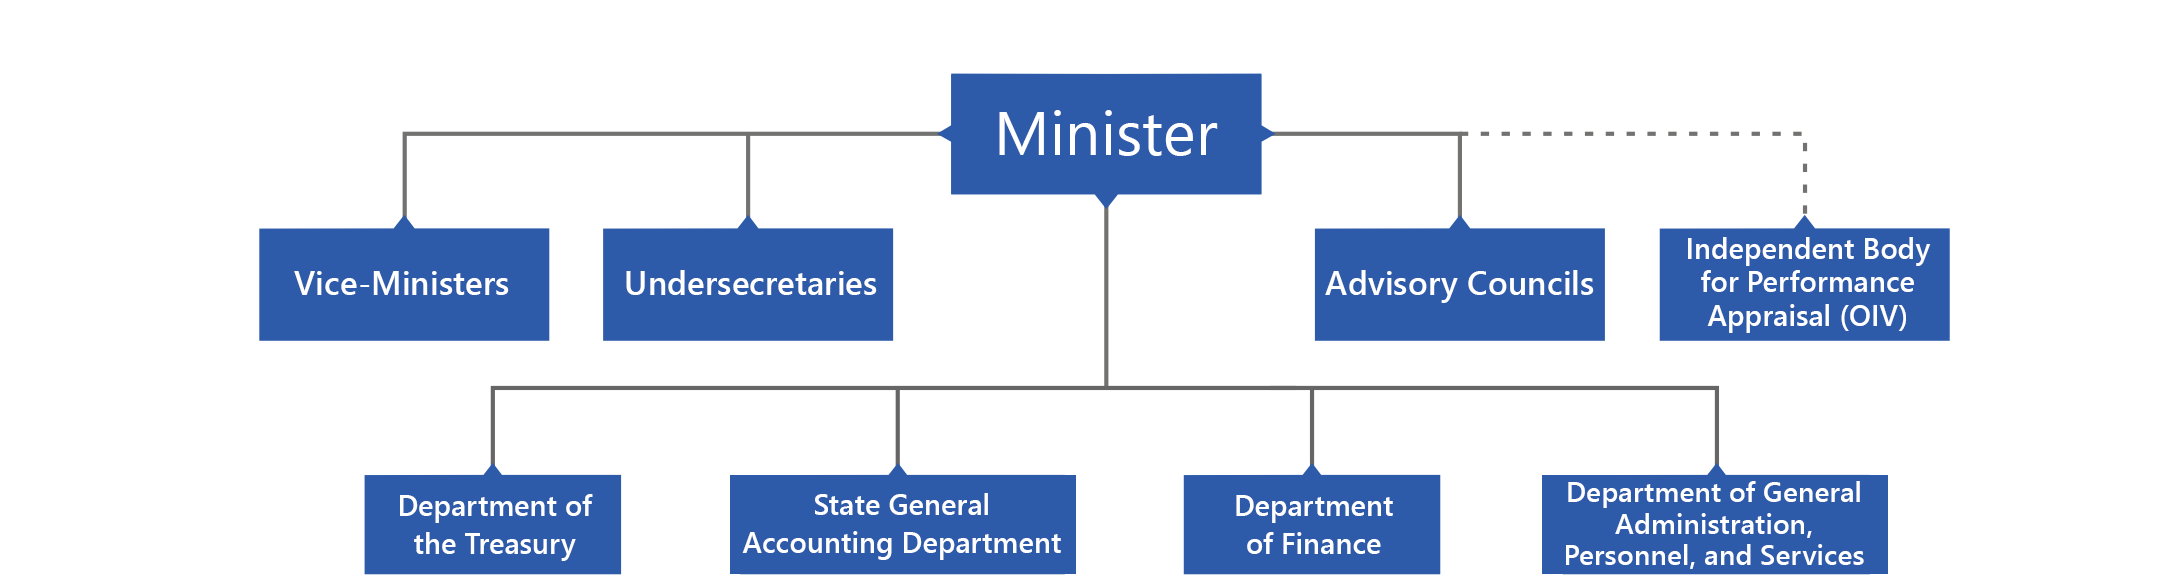 Personnel Department Chart